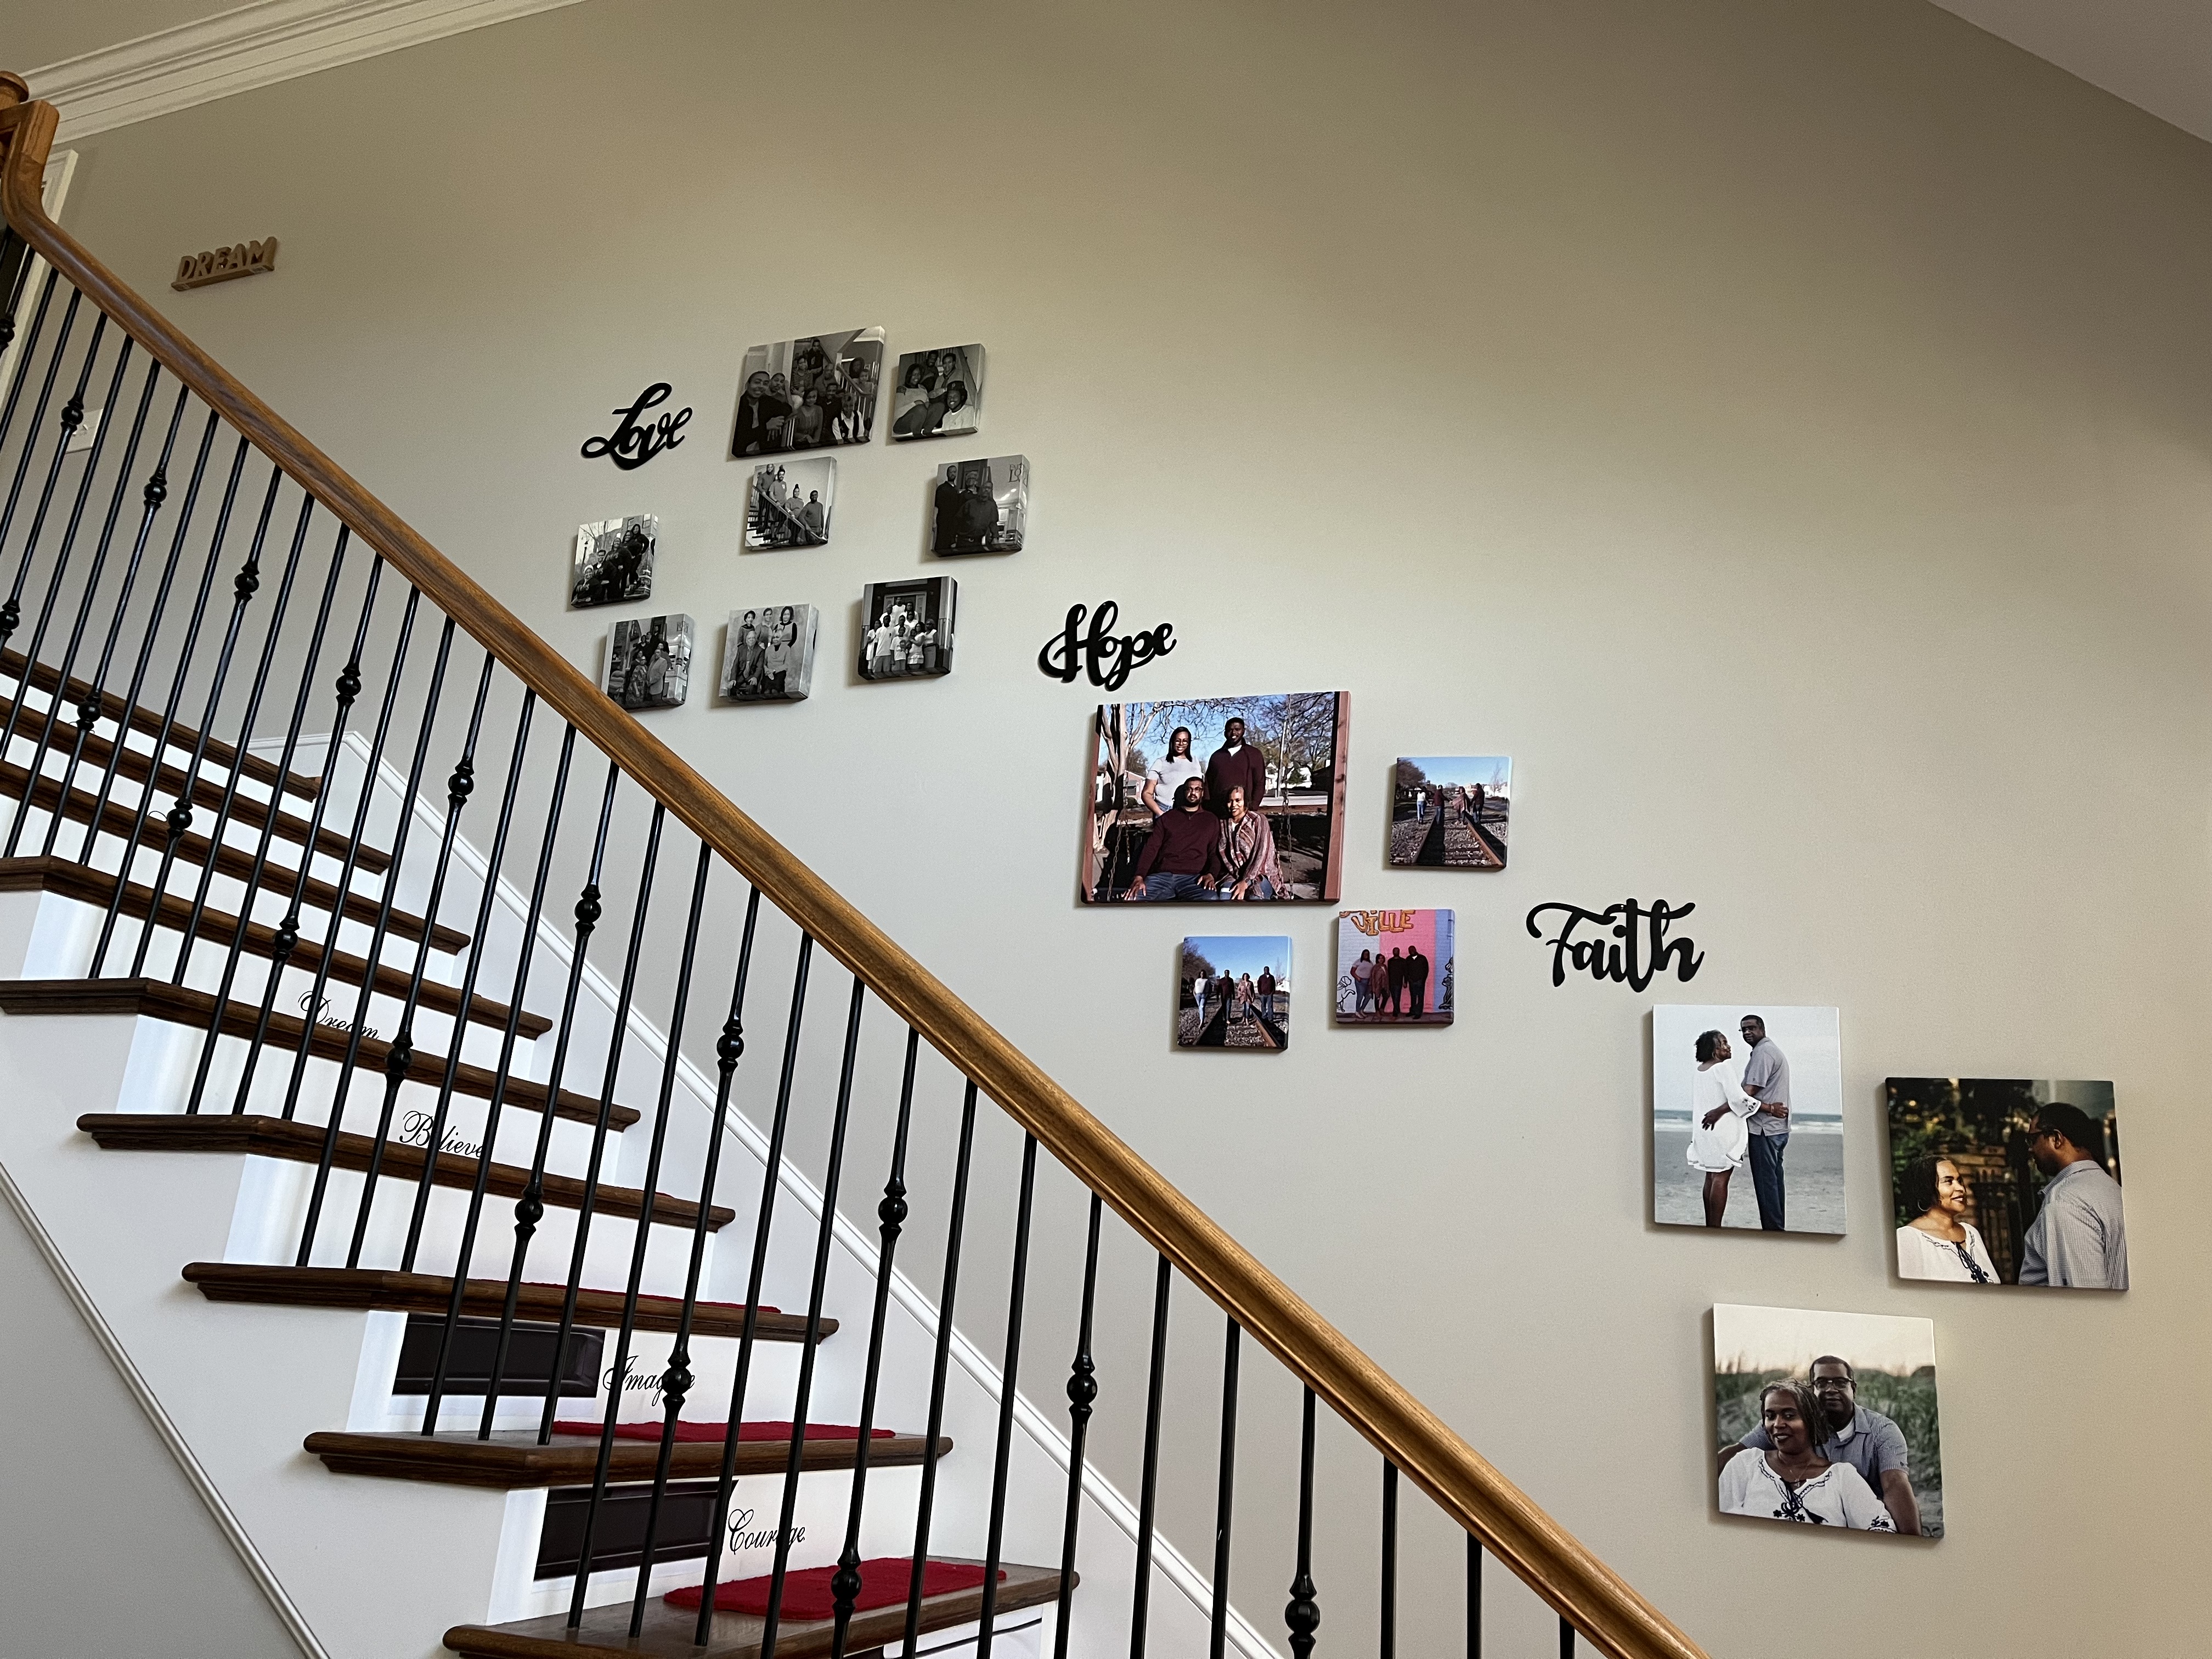 Design Ideas for a Unique Gallery Wall for Dad 